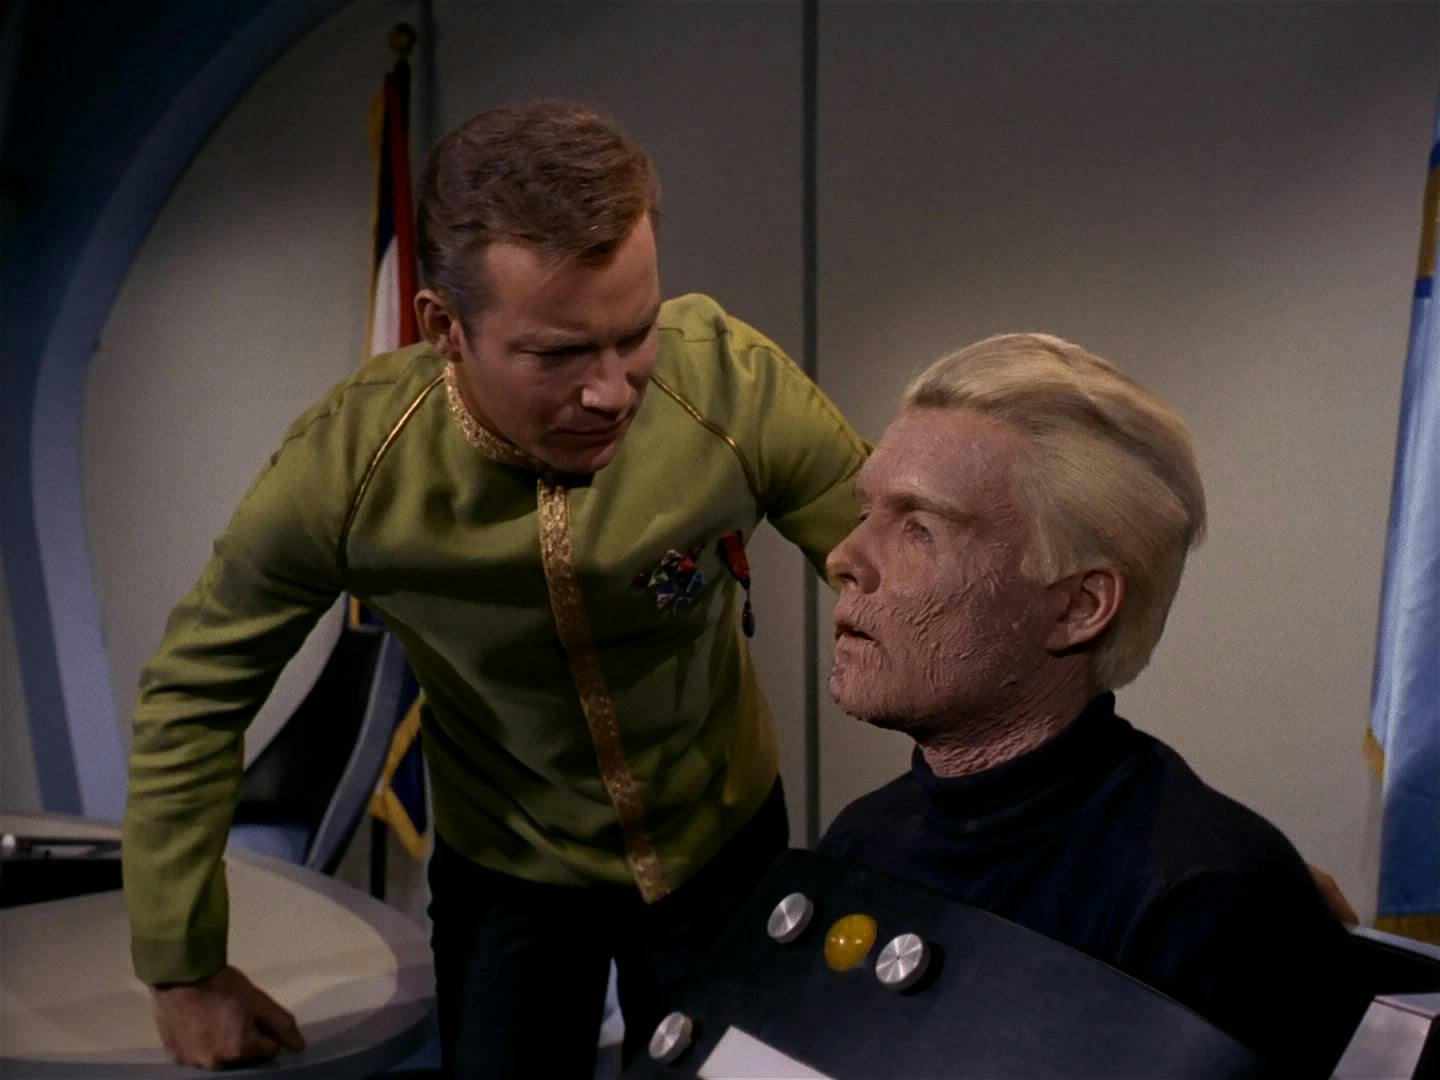 Captain Kirk stands next to Captain Pike, who is disabled after his accident and is in a futuristic wheelchair.